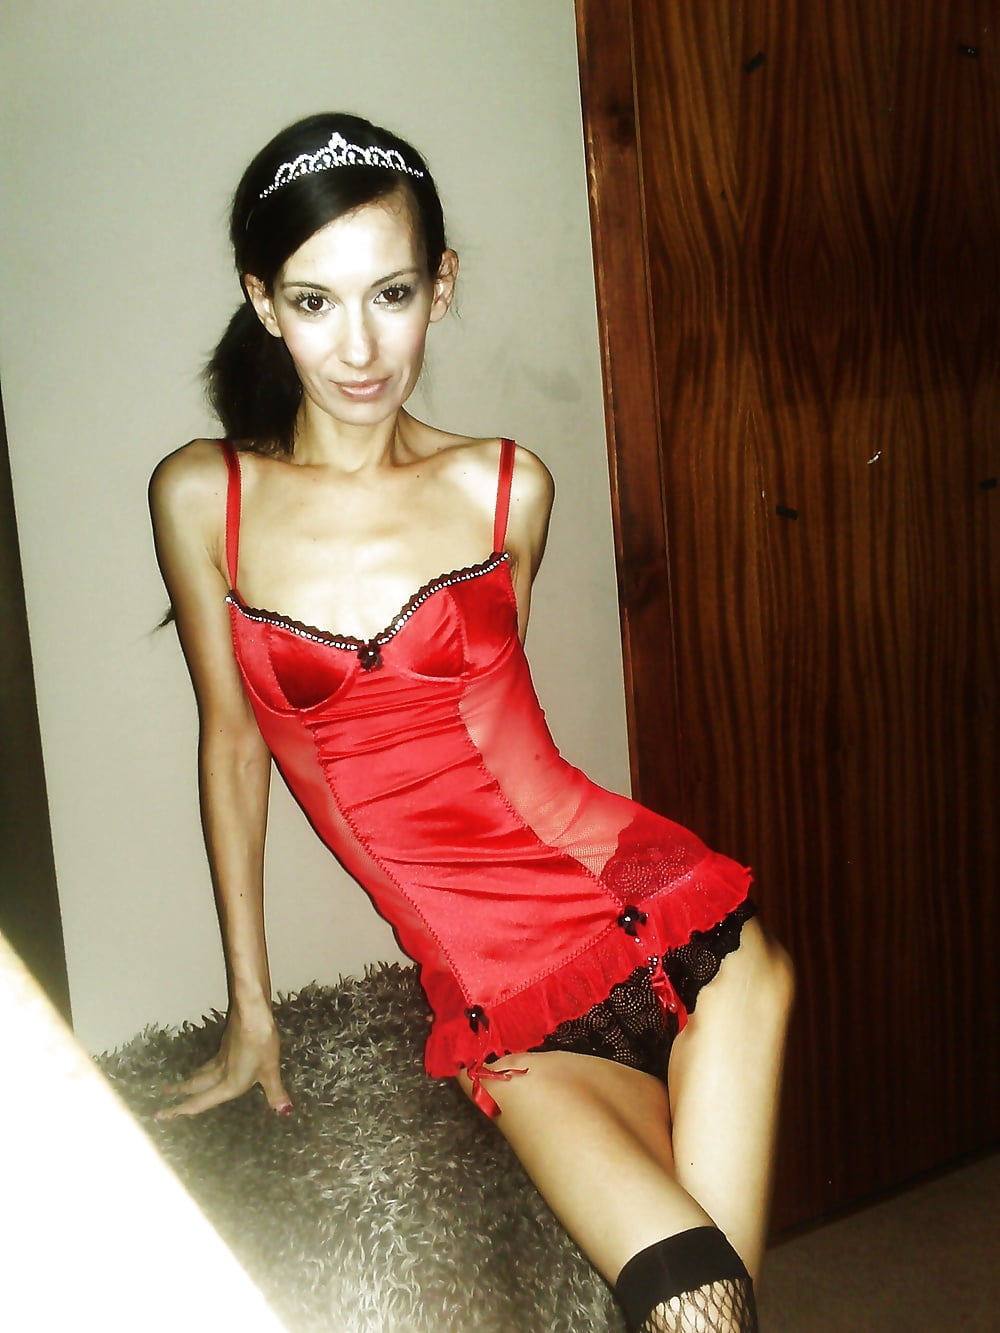 Interracial Anorexic Porn - Skinny anorexia pictures porno - Porn galleries